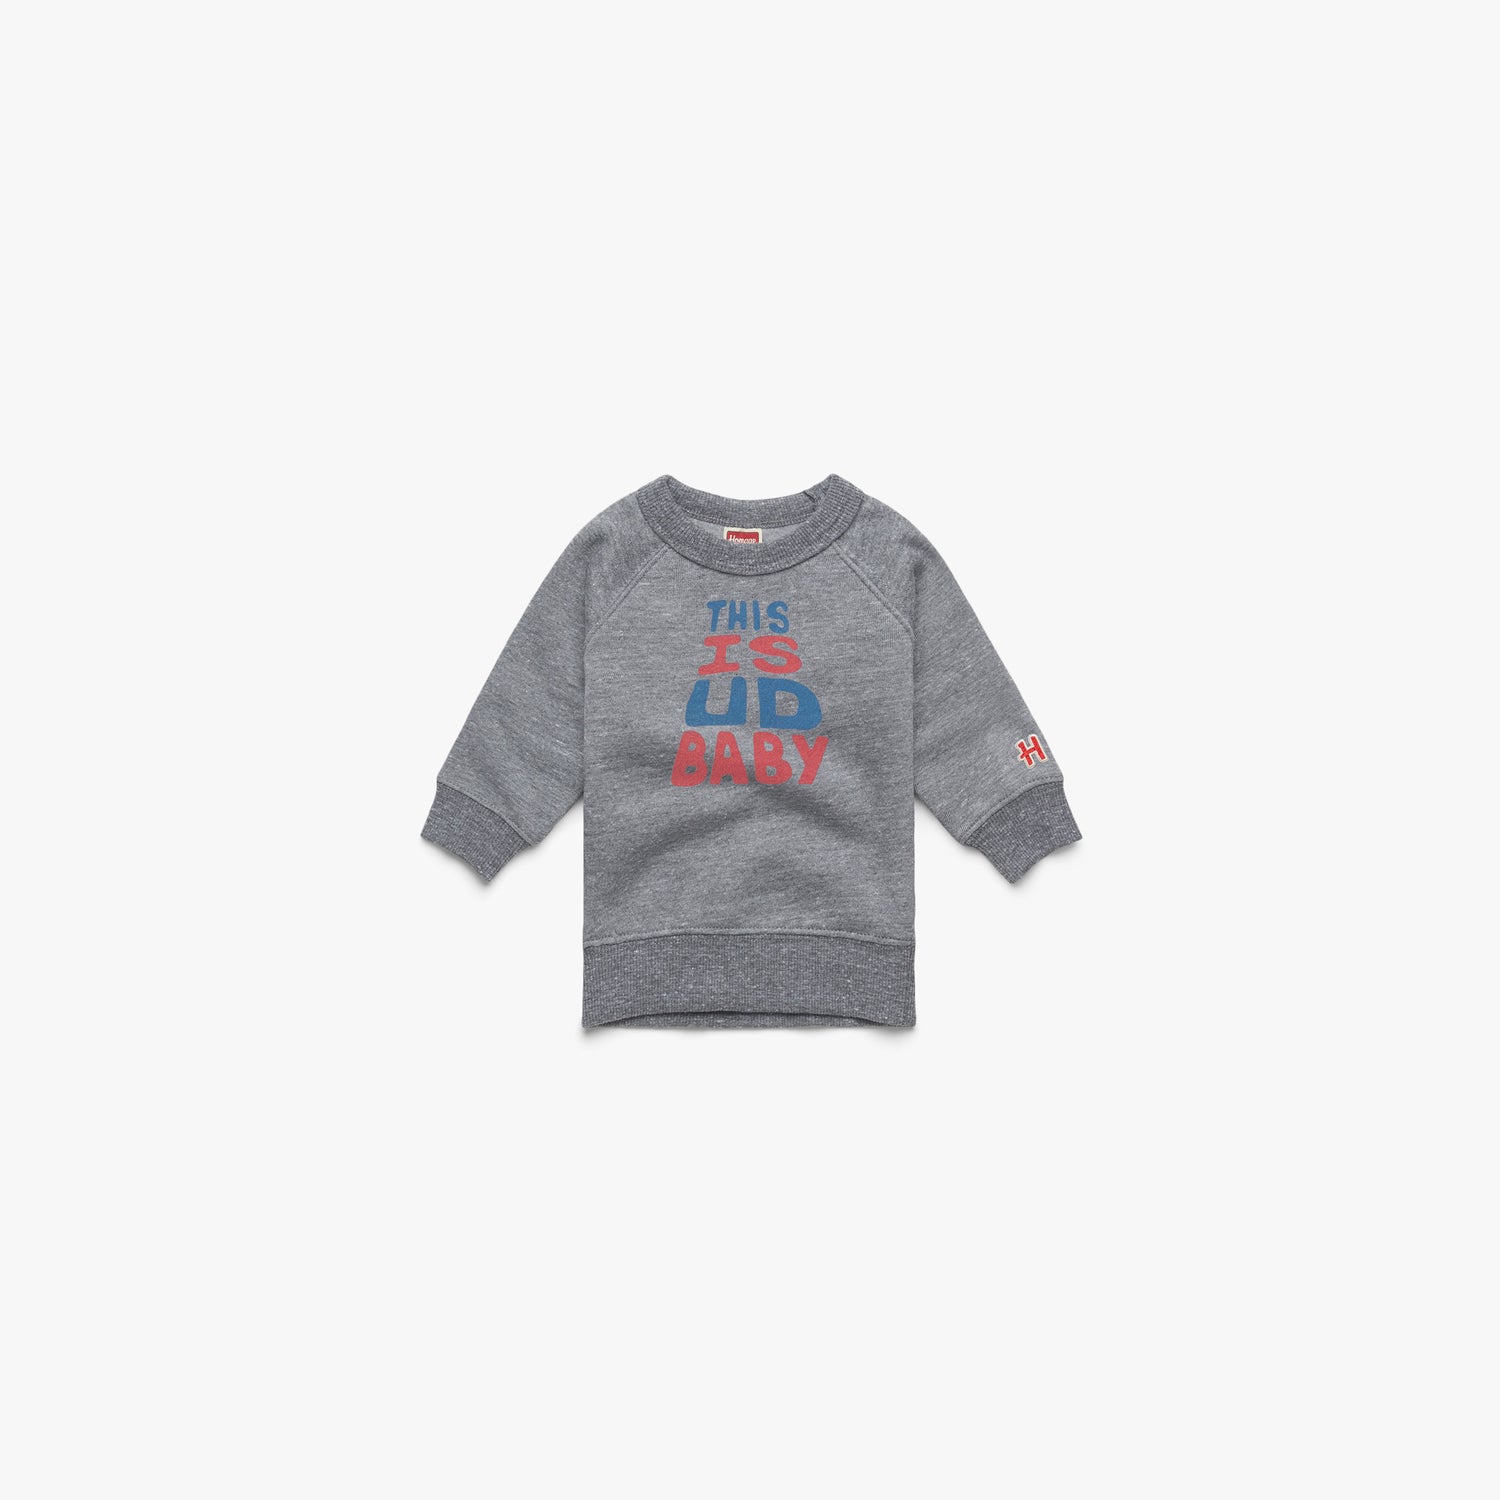 Baby This Is UD Baby Crewneck